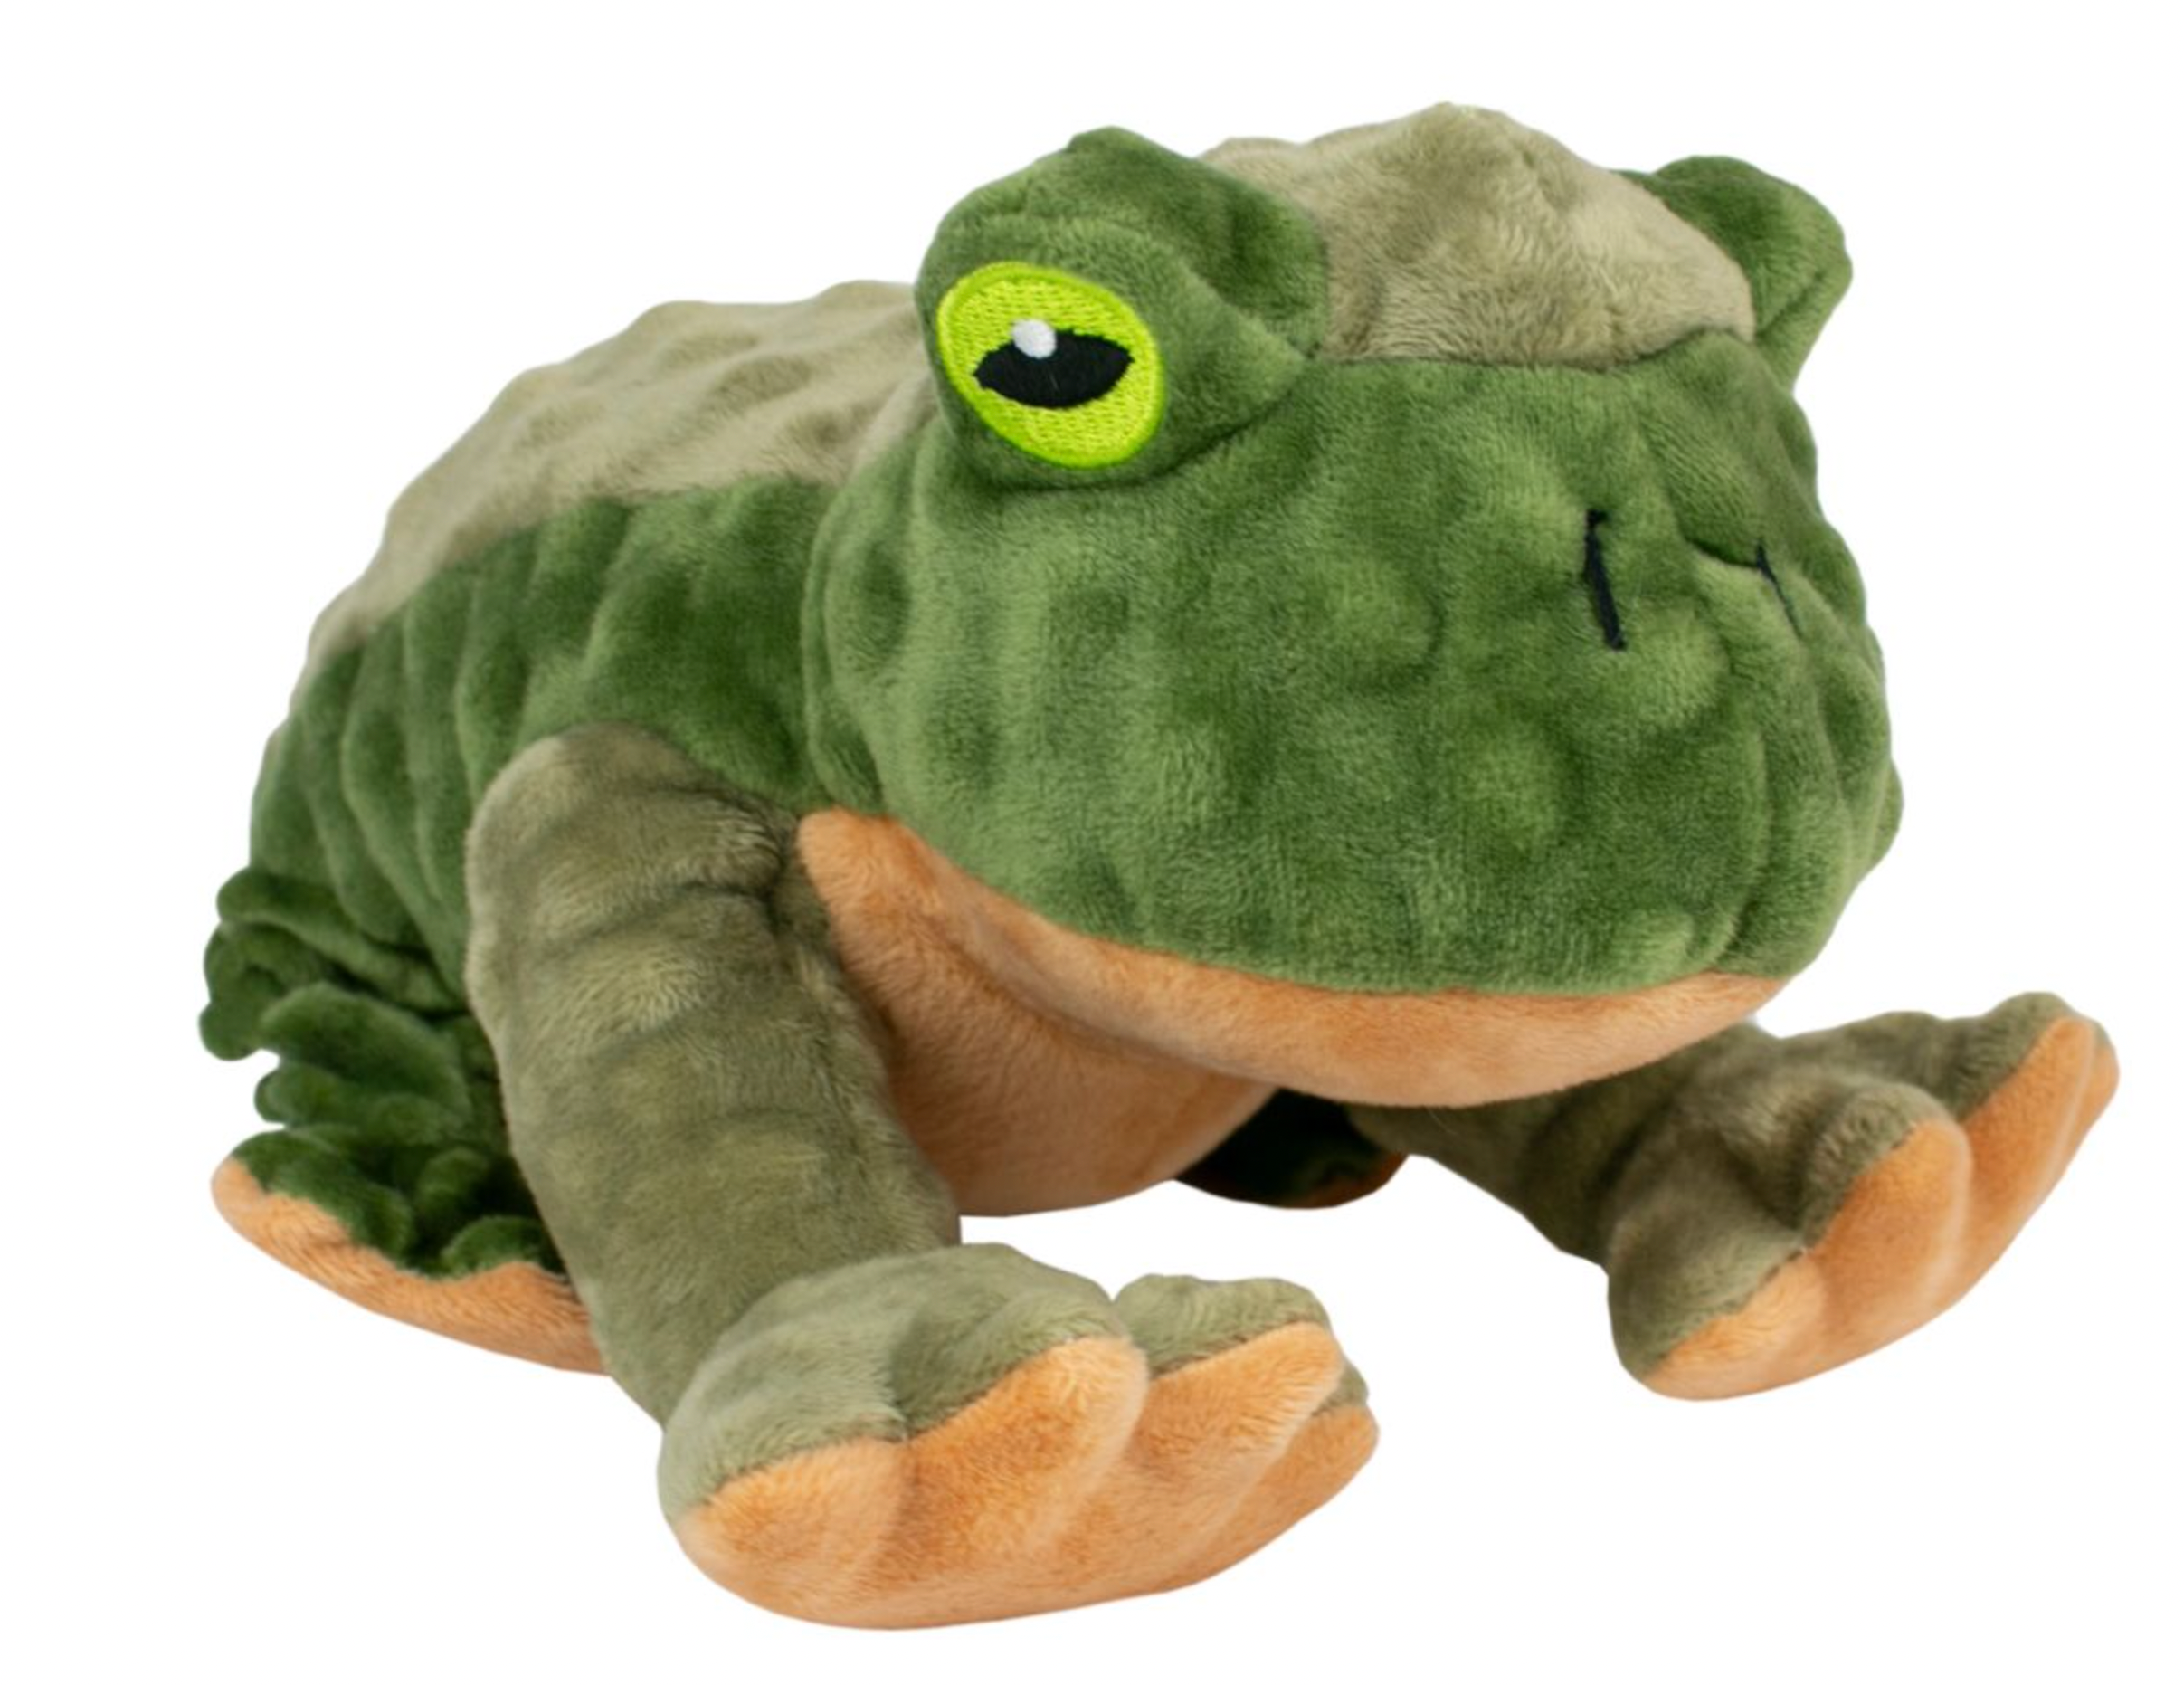 Tall Tails Animated Squeaker Dog Toy, Twitchy Frog